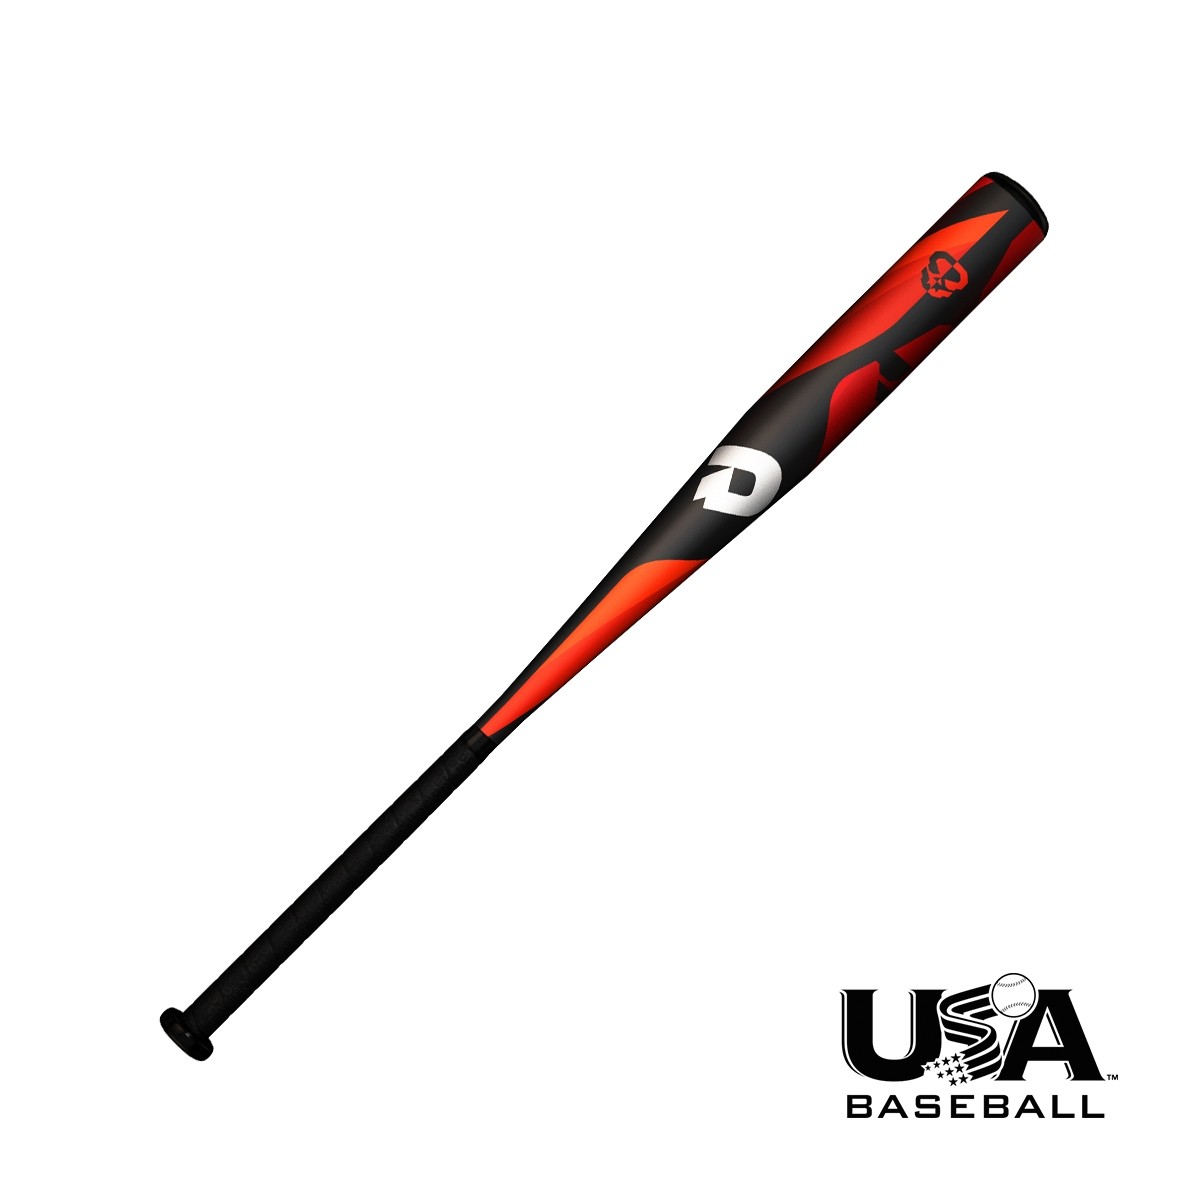 High-strength DX1 alloy built for performance Ironed end cap for lighter swing weight 2-1/2 inch barrel Meets new USA Baseball standard 1-year Warranty The DeMarini Uprising USA Baseball bat is the perfect bat for the young player just starting out in a Junior Big Barrel league. With a 2.5 inch barrel diameter and a light swing weight, it features a DX1 Alloy one-piece construction that's built for performance. Comes with a 1 year manufacturer's warranty from DeMarini. - -10 length to weight ratio - 2 1/2 inch barrel diameter - Balanced swing weight - High-strength DX1 Alloy built for performance - IonD End Cap for lighter swing weight - Approved for play in USA Baseball - 1 year manufacturer's warranty